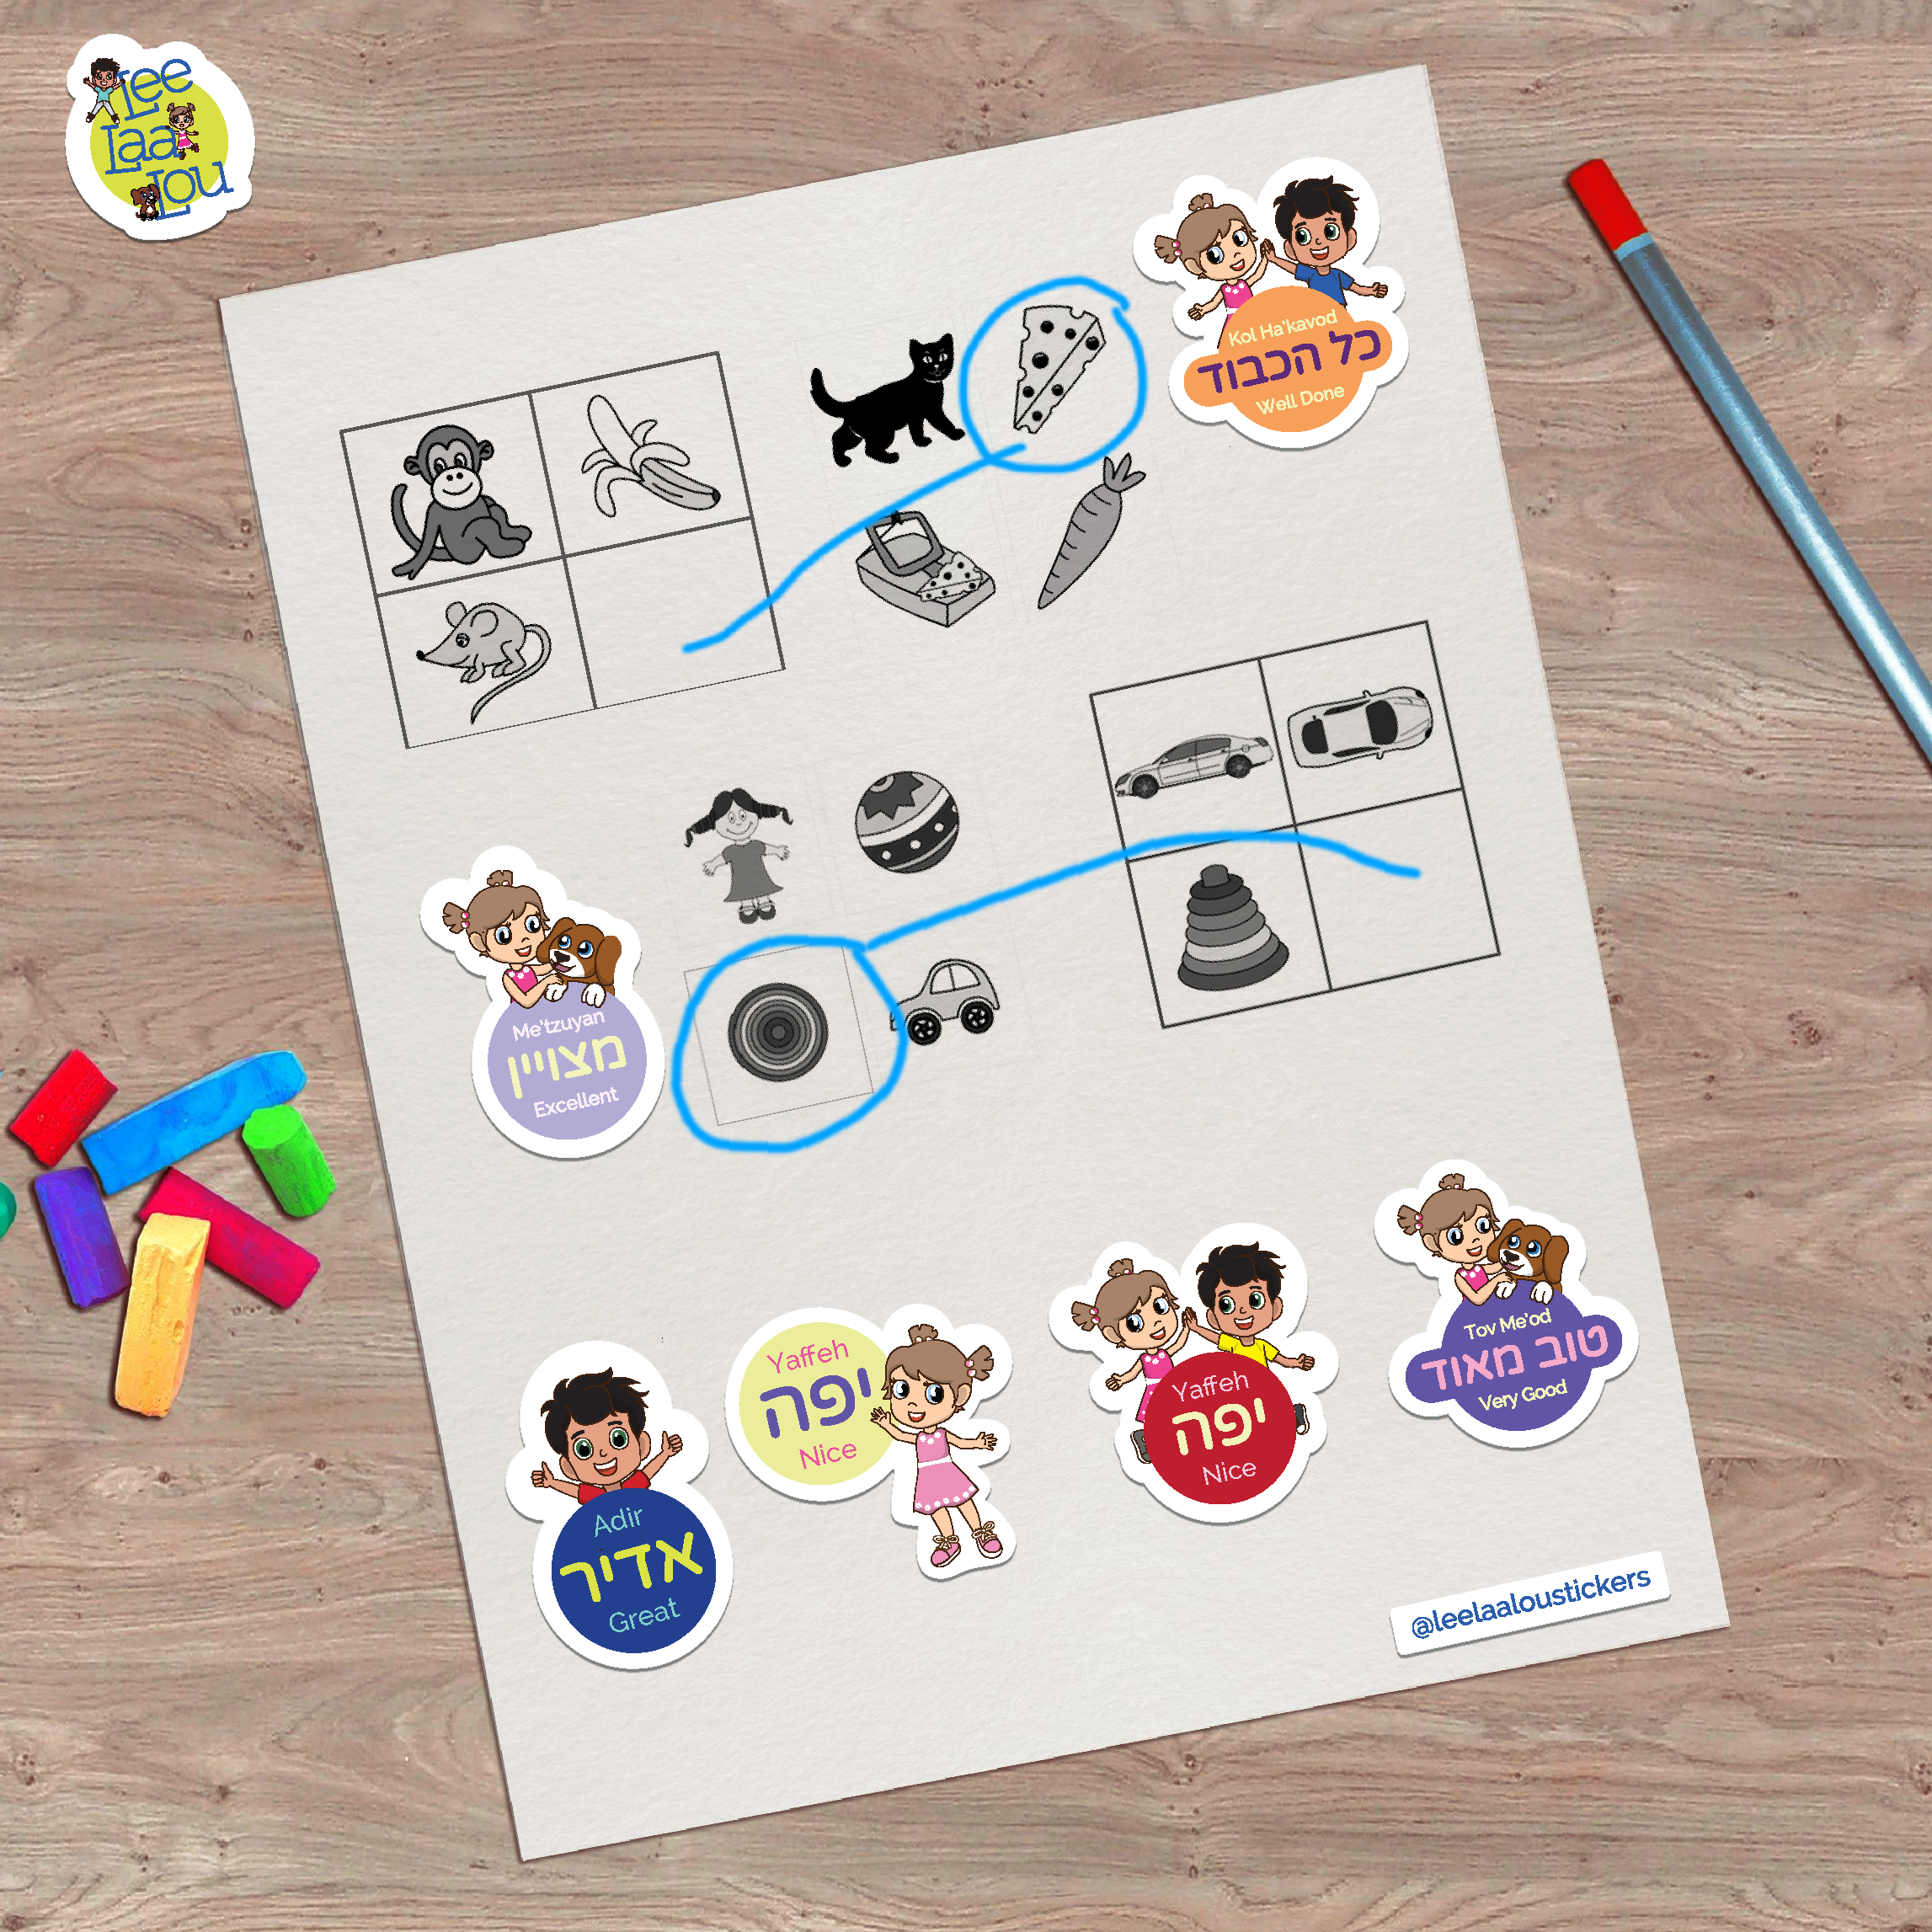 Encouragement stickers in Hebrew and English. Learn how to encourage kids in Hebrew and teach them at the same time. Great stickers for parents, teachers, educators and kids.